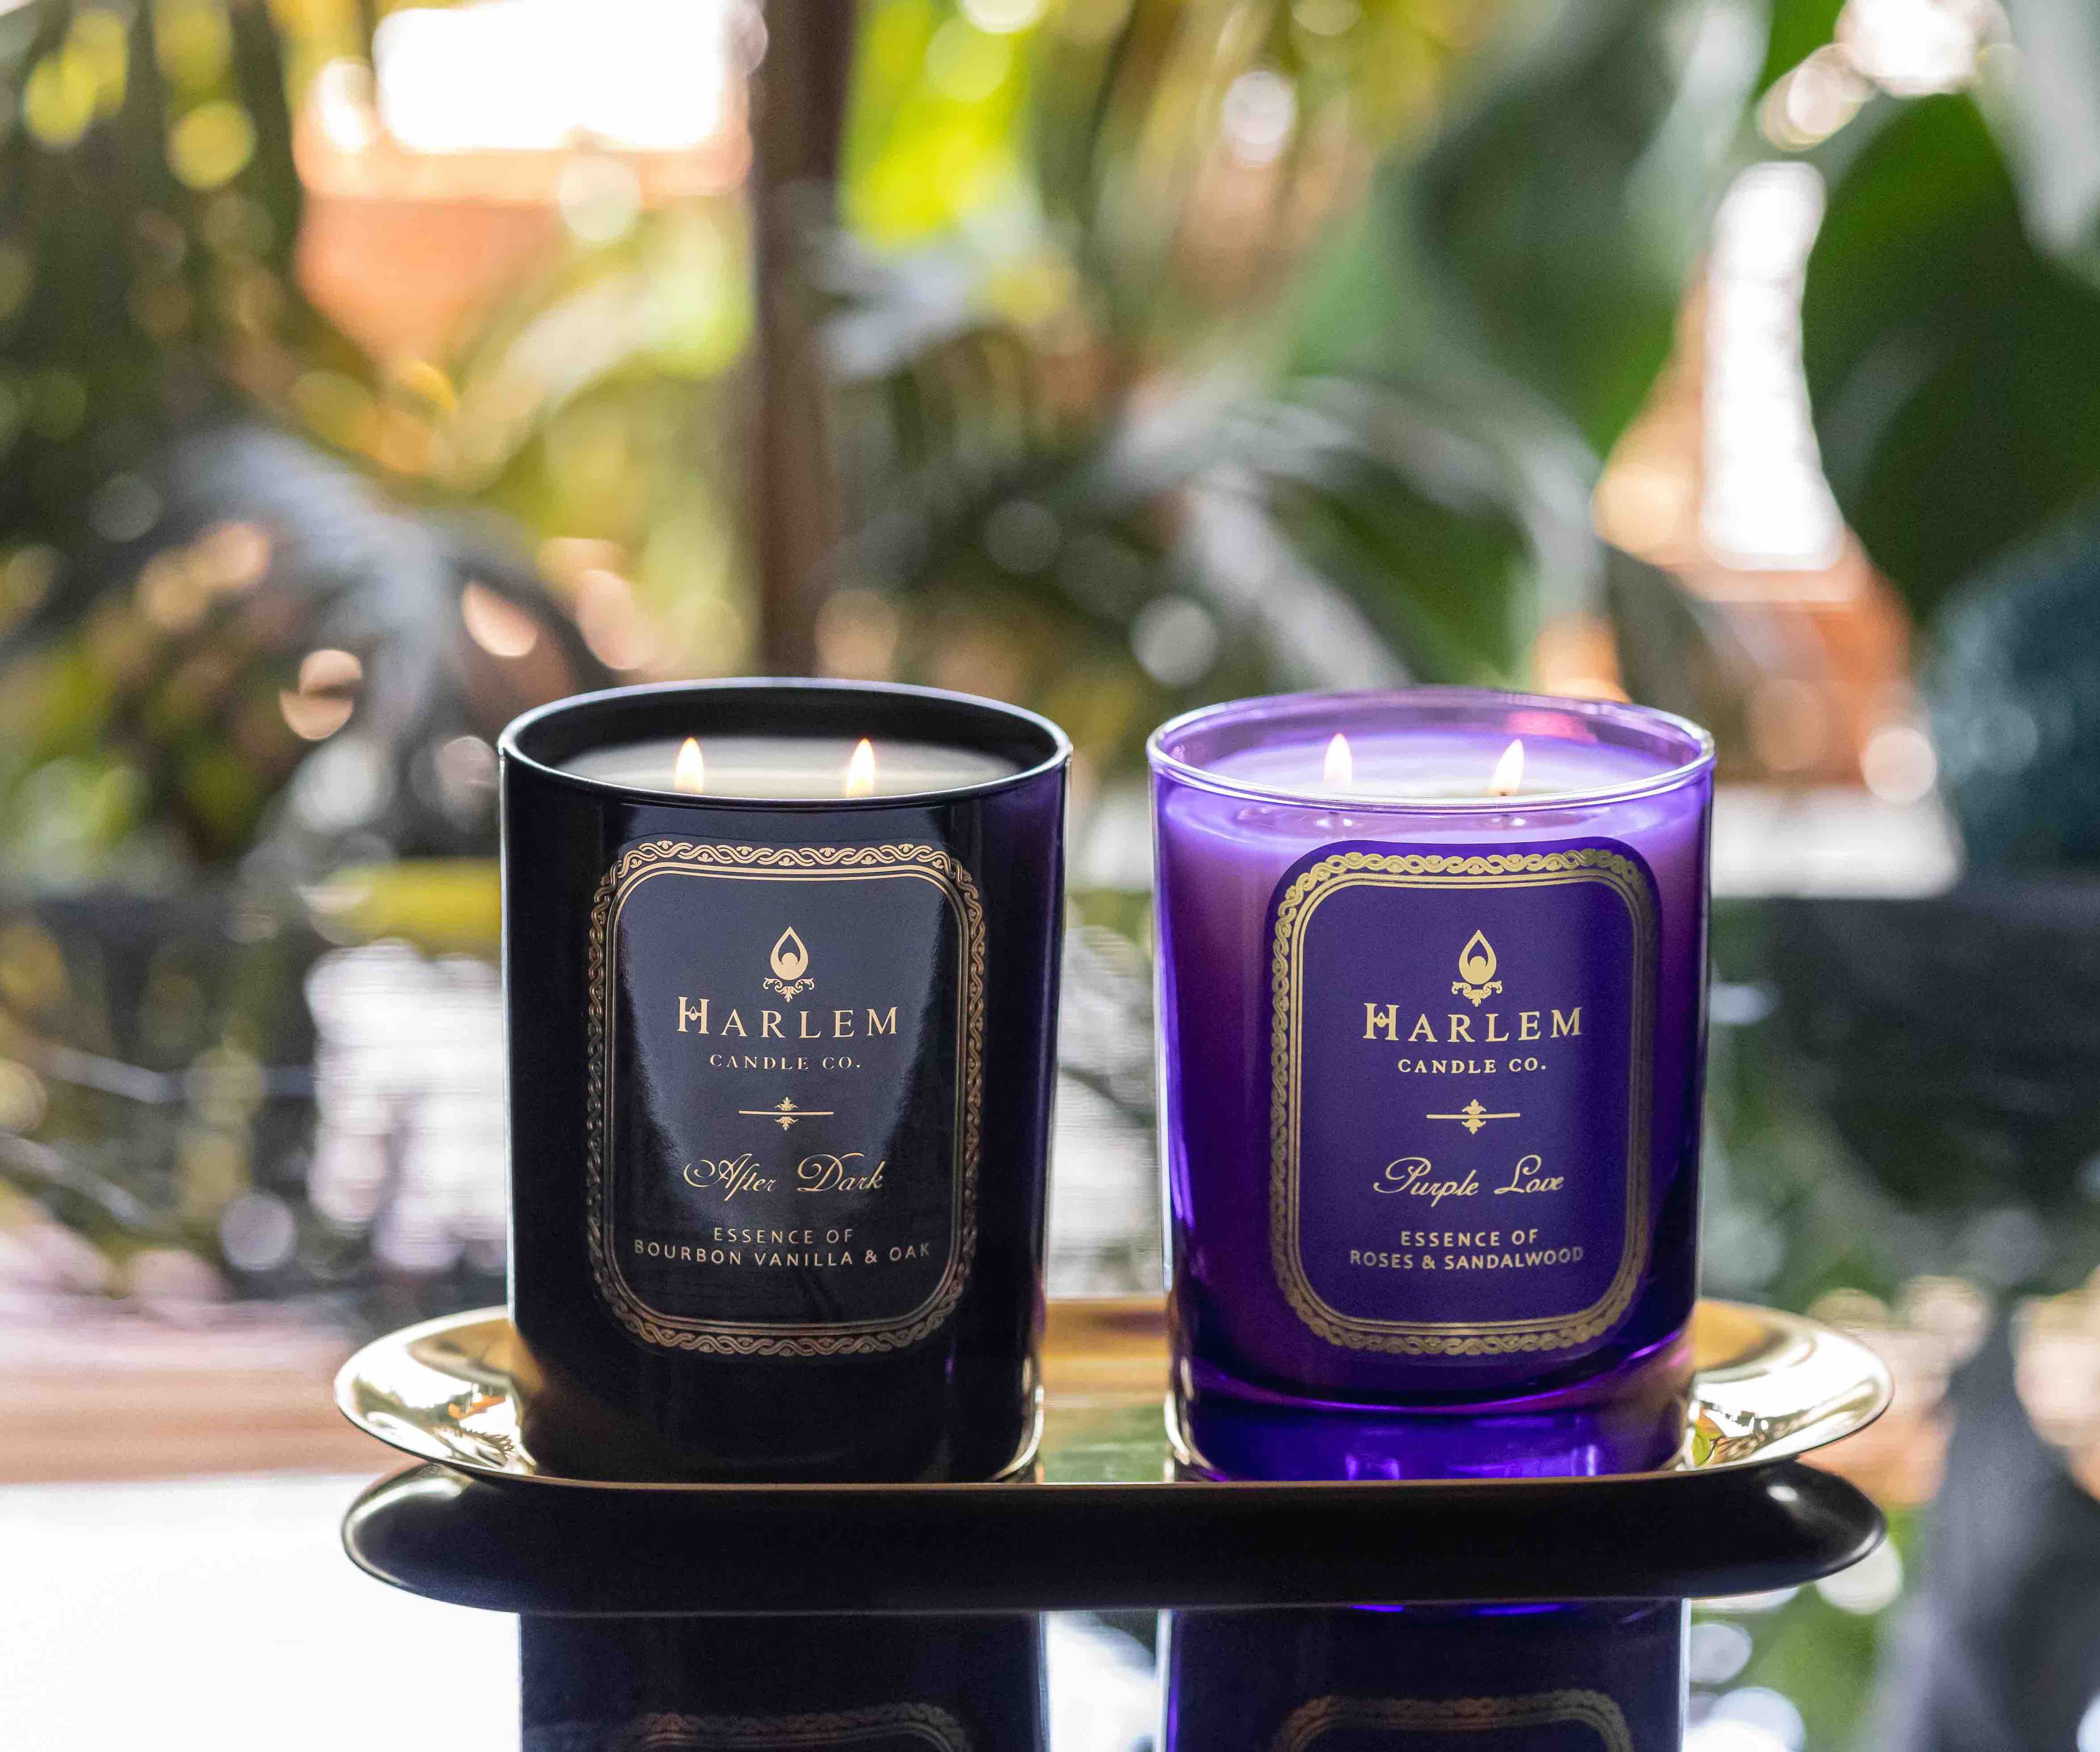 This is an image of our Purple Love and After Dark candles pictured on a table with plants behind.